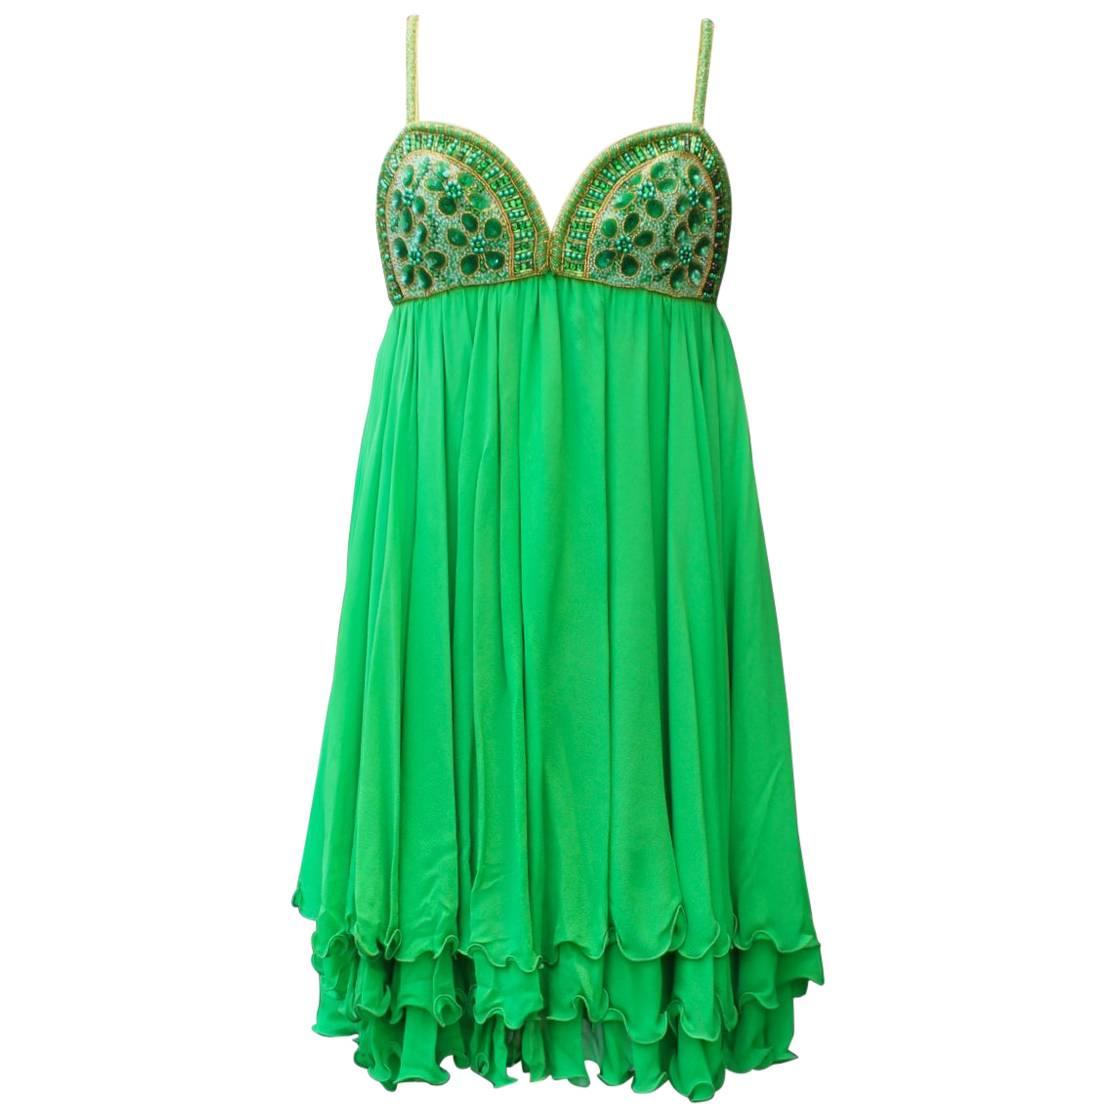 Serge Lepage Haute Couture embroidered green chiffon short dress, 1980s   im Angebot